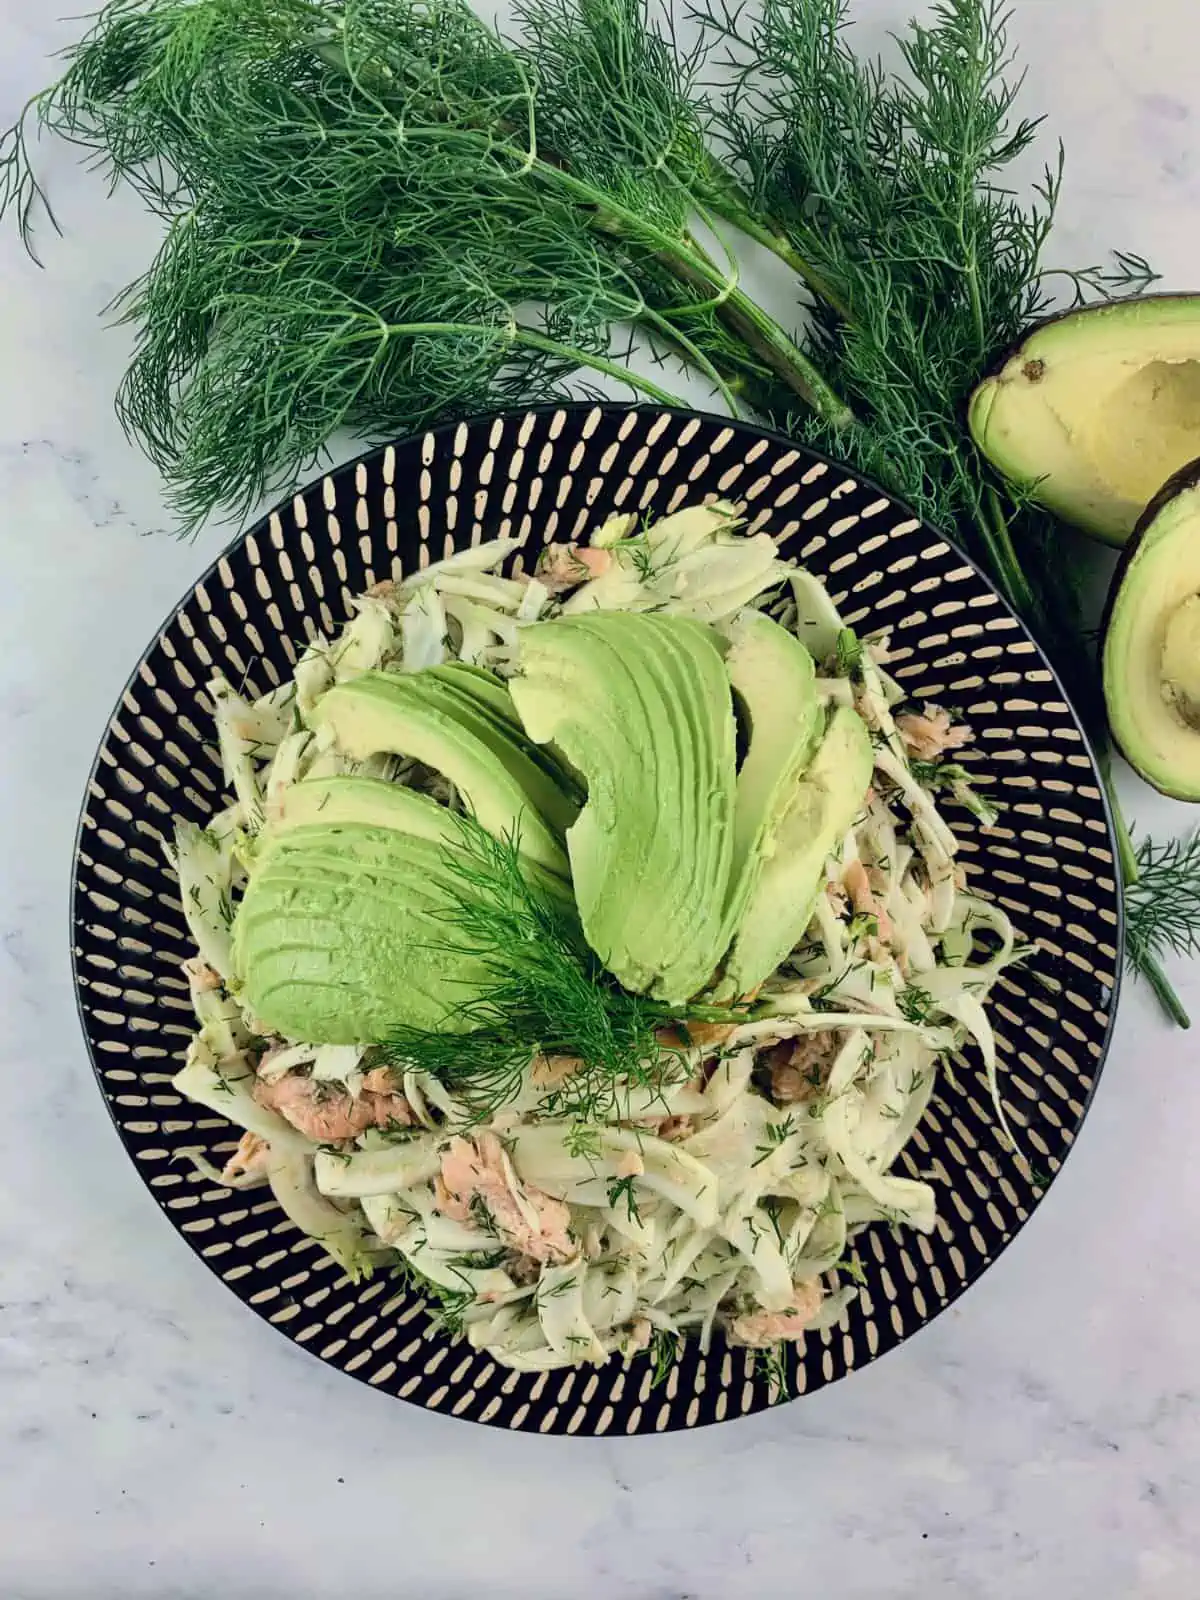 Smoked trout & fennel salad on a patterned platter with dill & avocado on the side.